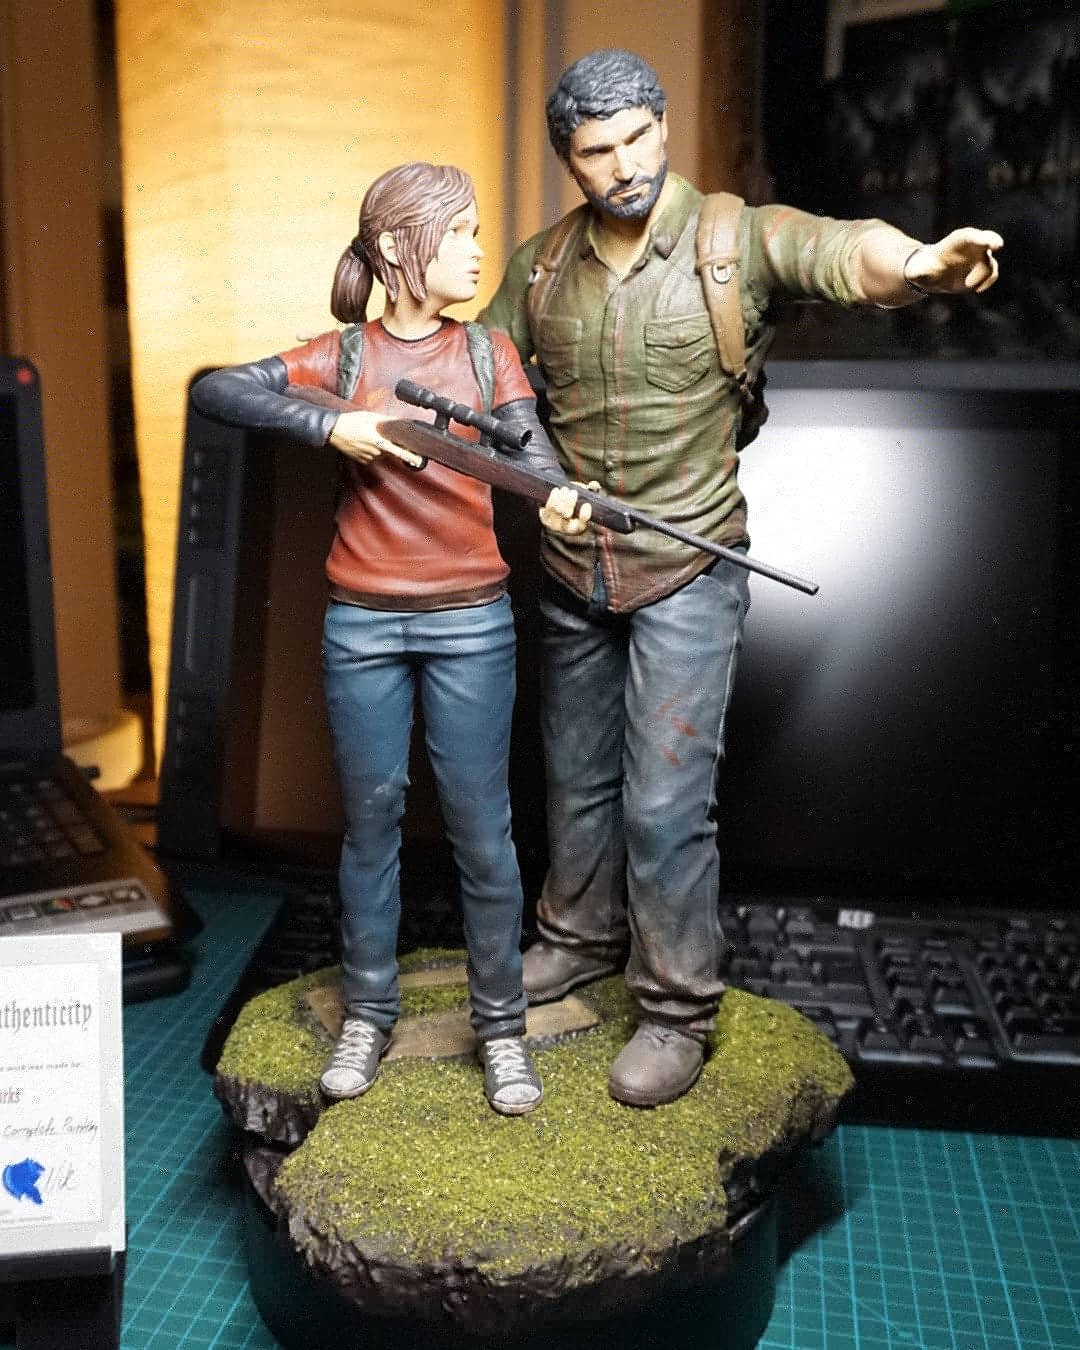 Best Ideas from The Last of Us 2 to 3D Print: Ellie, Joel, Accessories